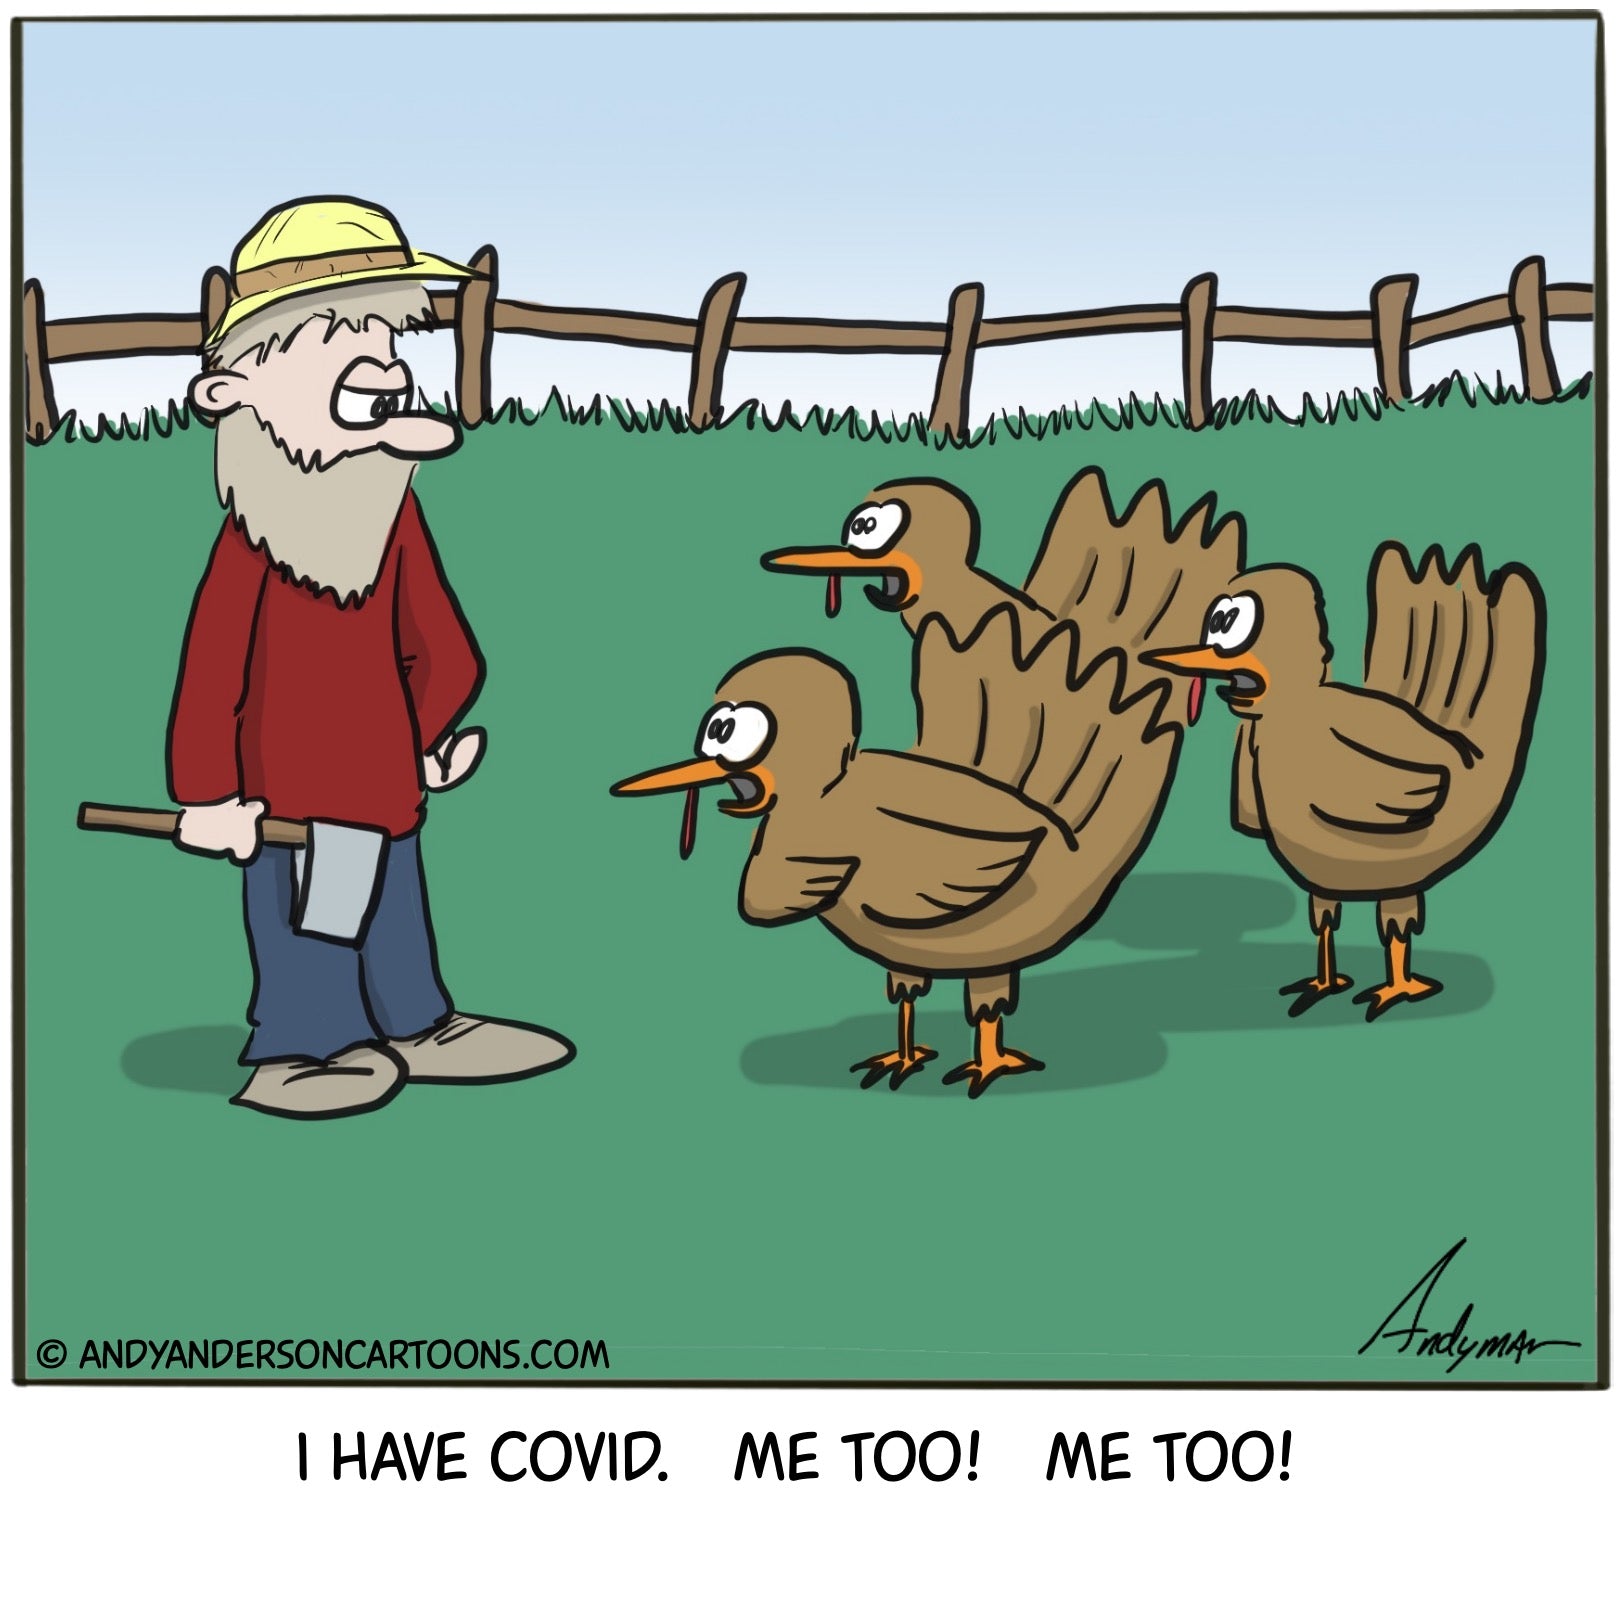 Funny cartoon about Thanksgiving in 2020 